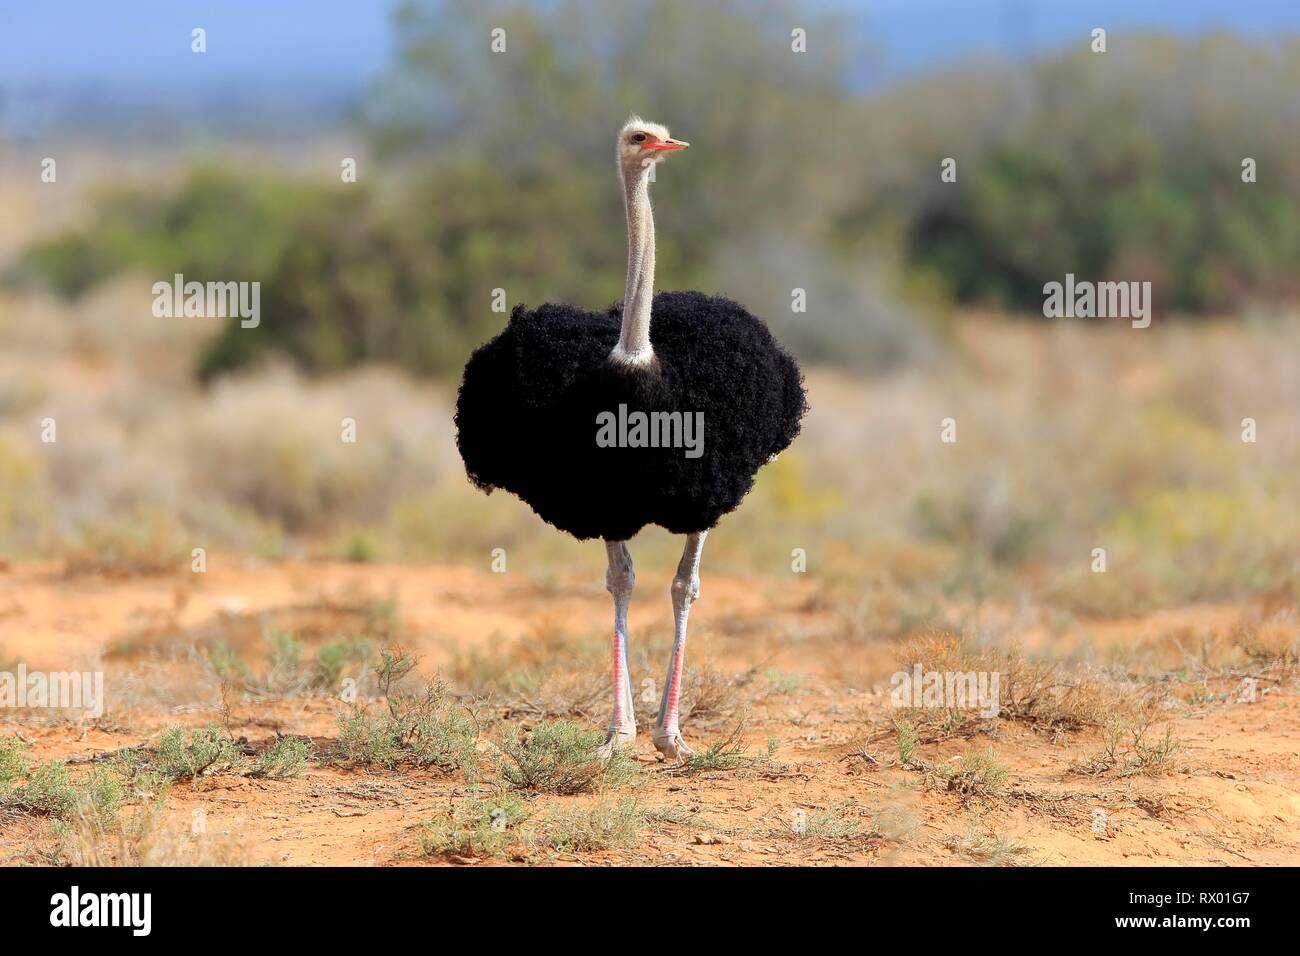 South African ostrich (Struthio camelus australis), adult male, Little Karoo, Western Cape, South Africa Stock Photo